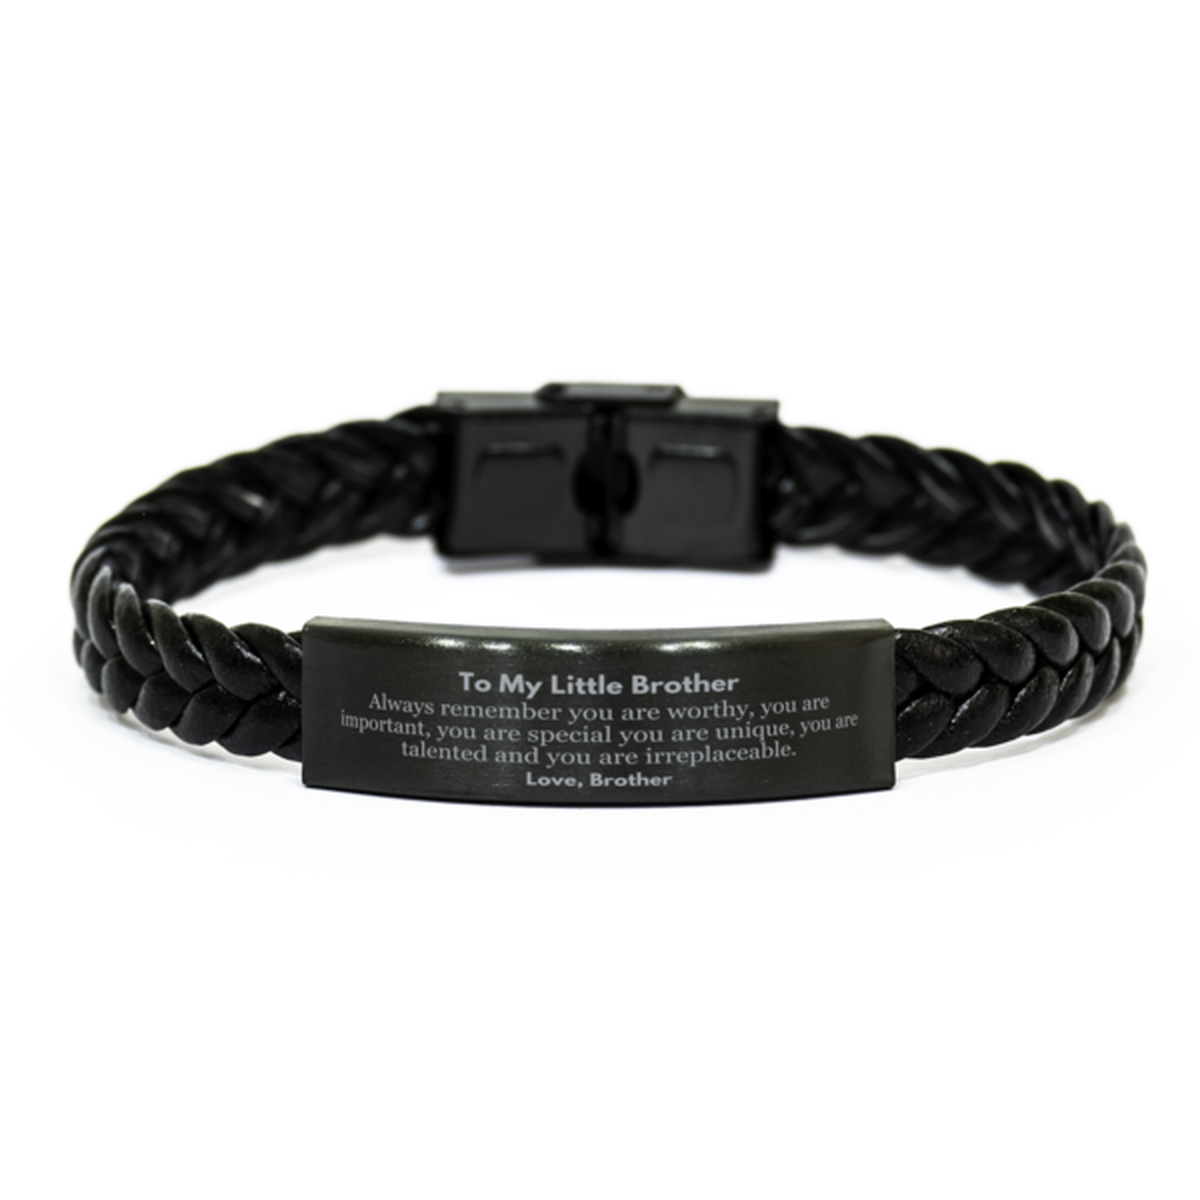 Little Brother Birthday Gifts from Brother, Inspirational Braided Leather Bracelet for Little Brother Christmas Graduation Gifts for Little Brother Always remember you are worthy, you are important. Love, Brother